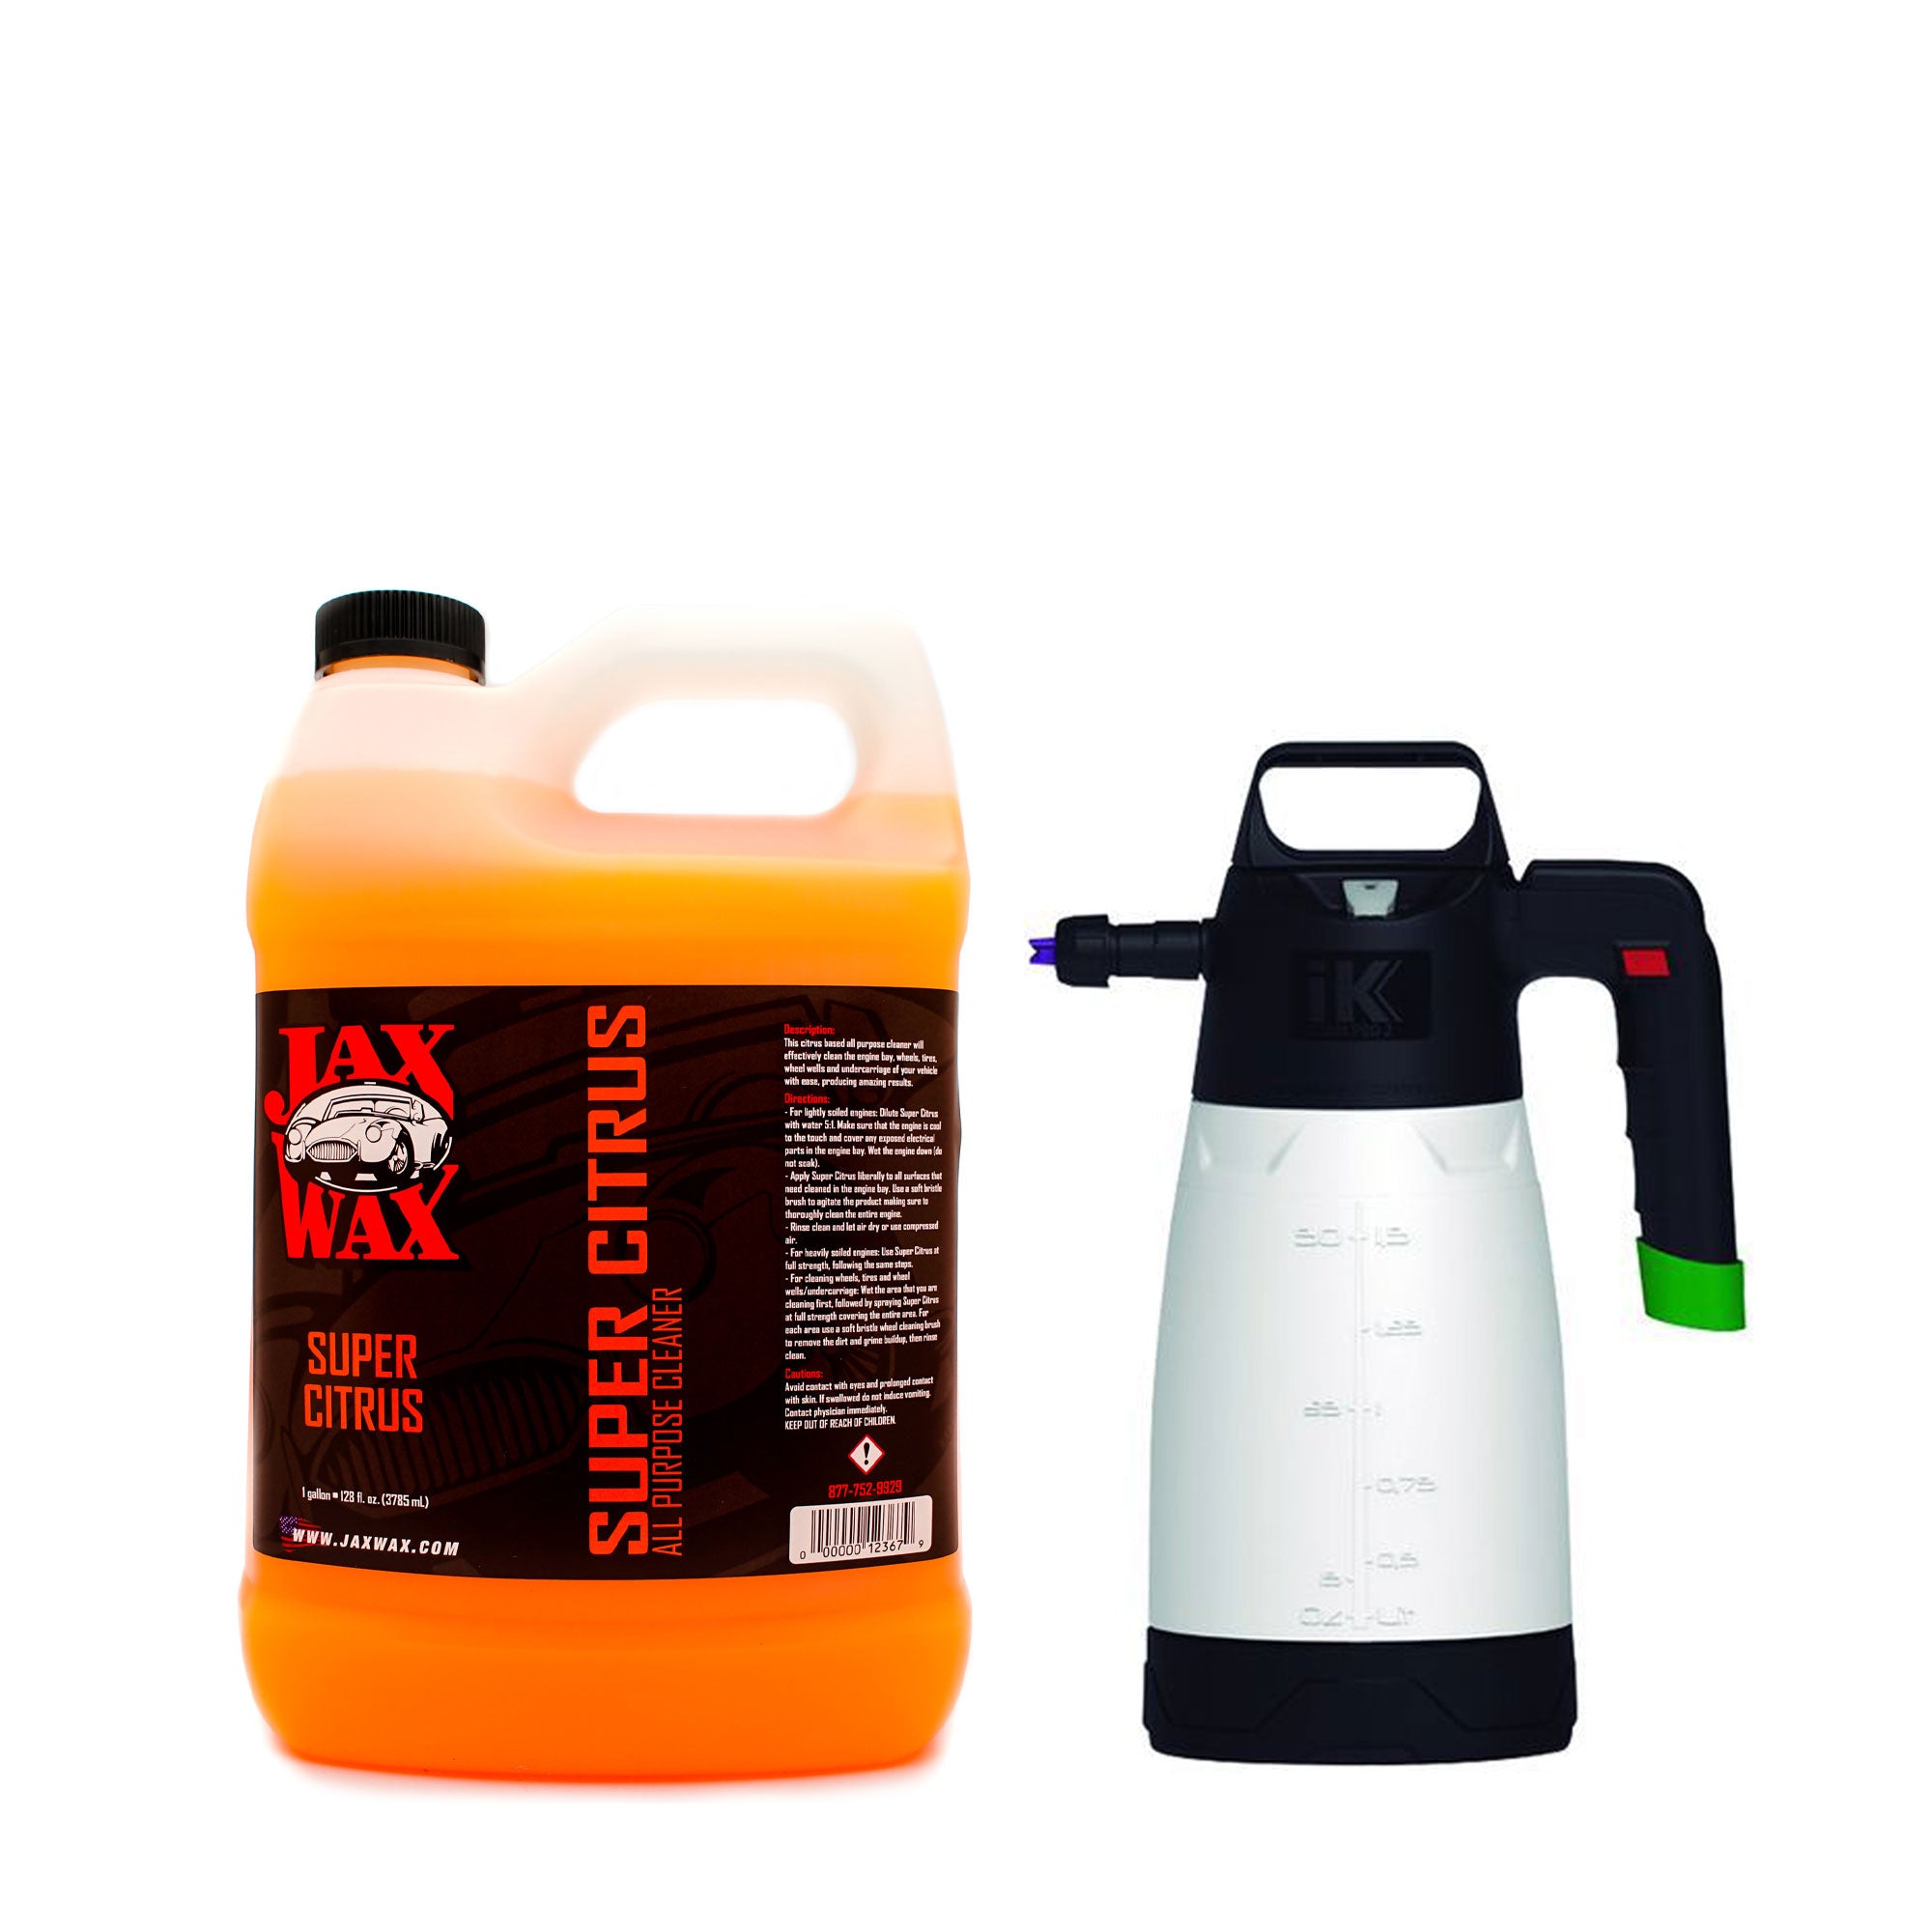 IK FOAM Pro 12 82676. Professional Detailing Products, Because Your Car is  a Reflection of You